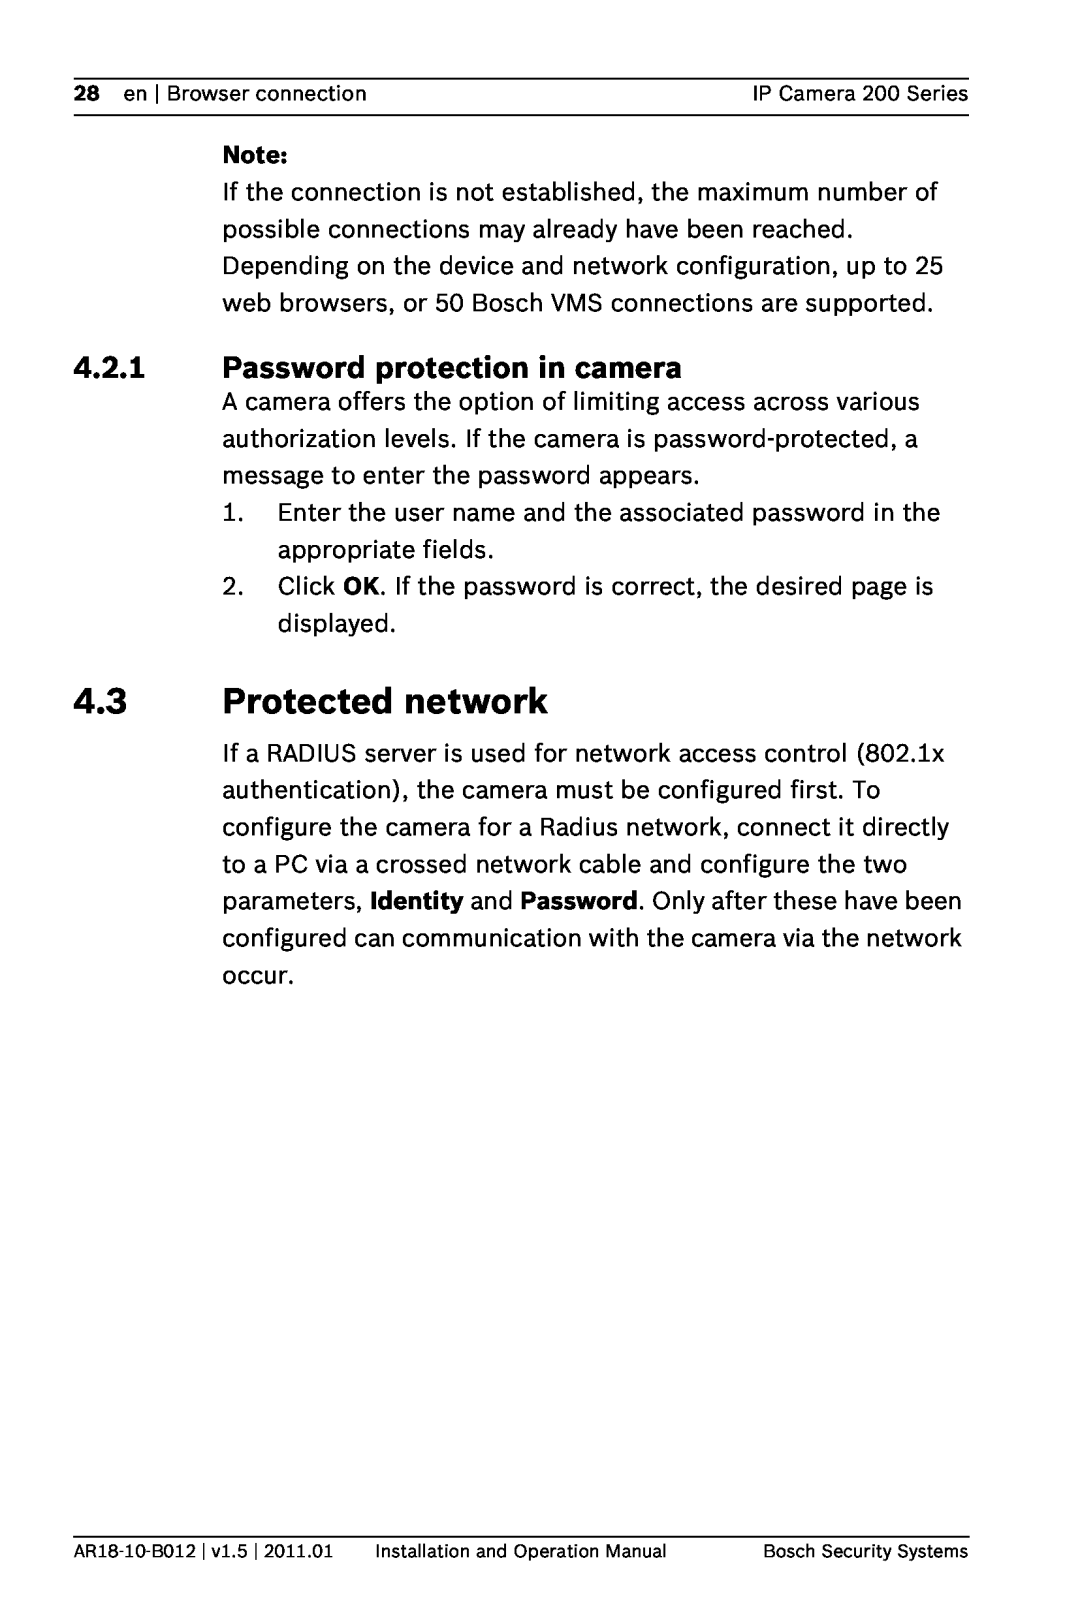 Bosch Appliances NDC-265-P operation manual Protected network, Password protection in camera 